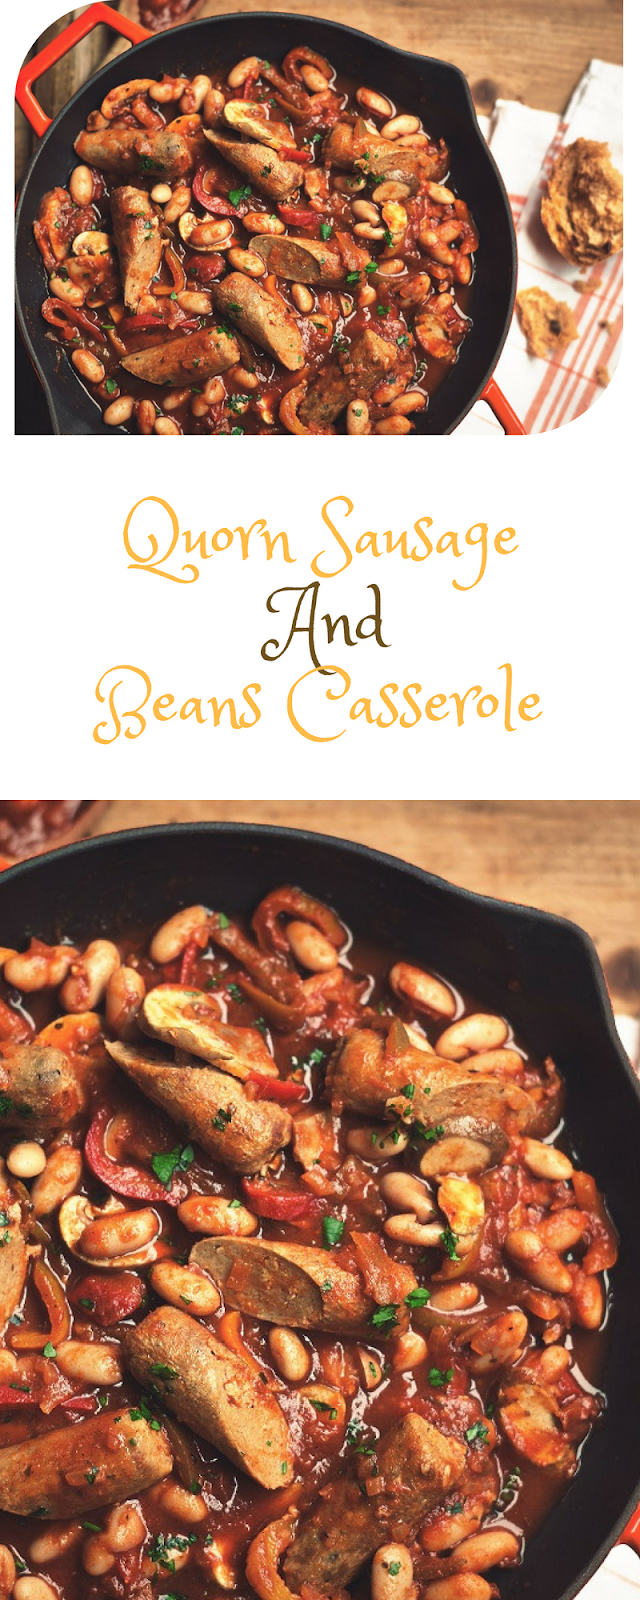 Quorn Sausage And Beans Casserole